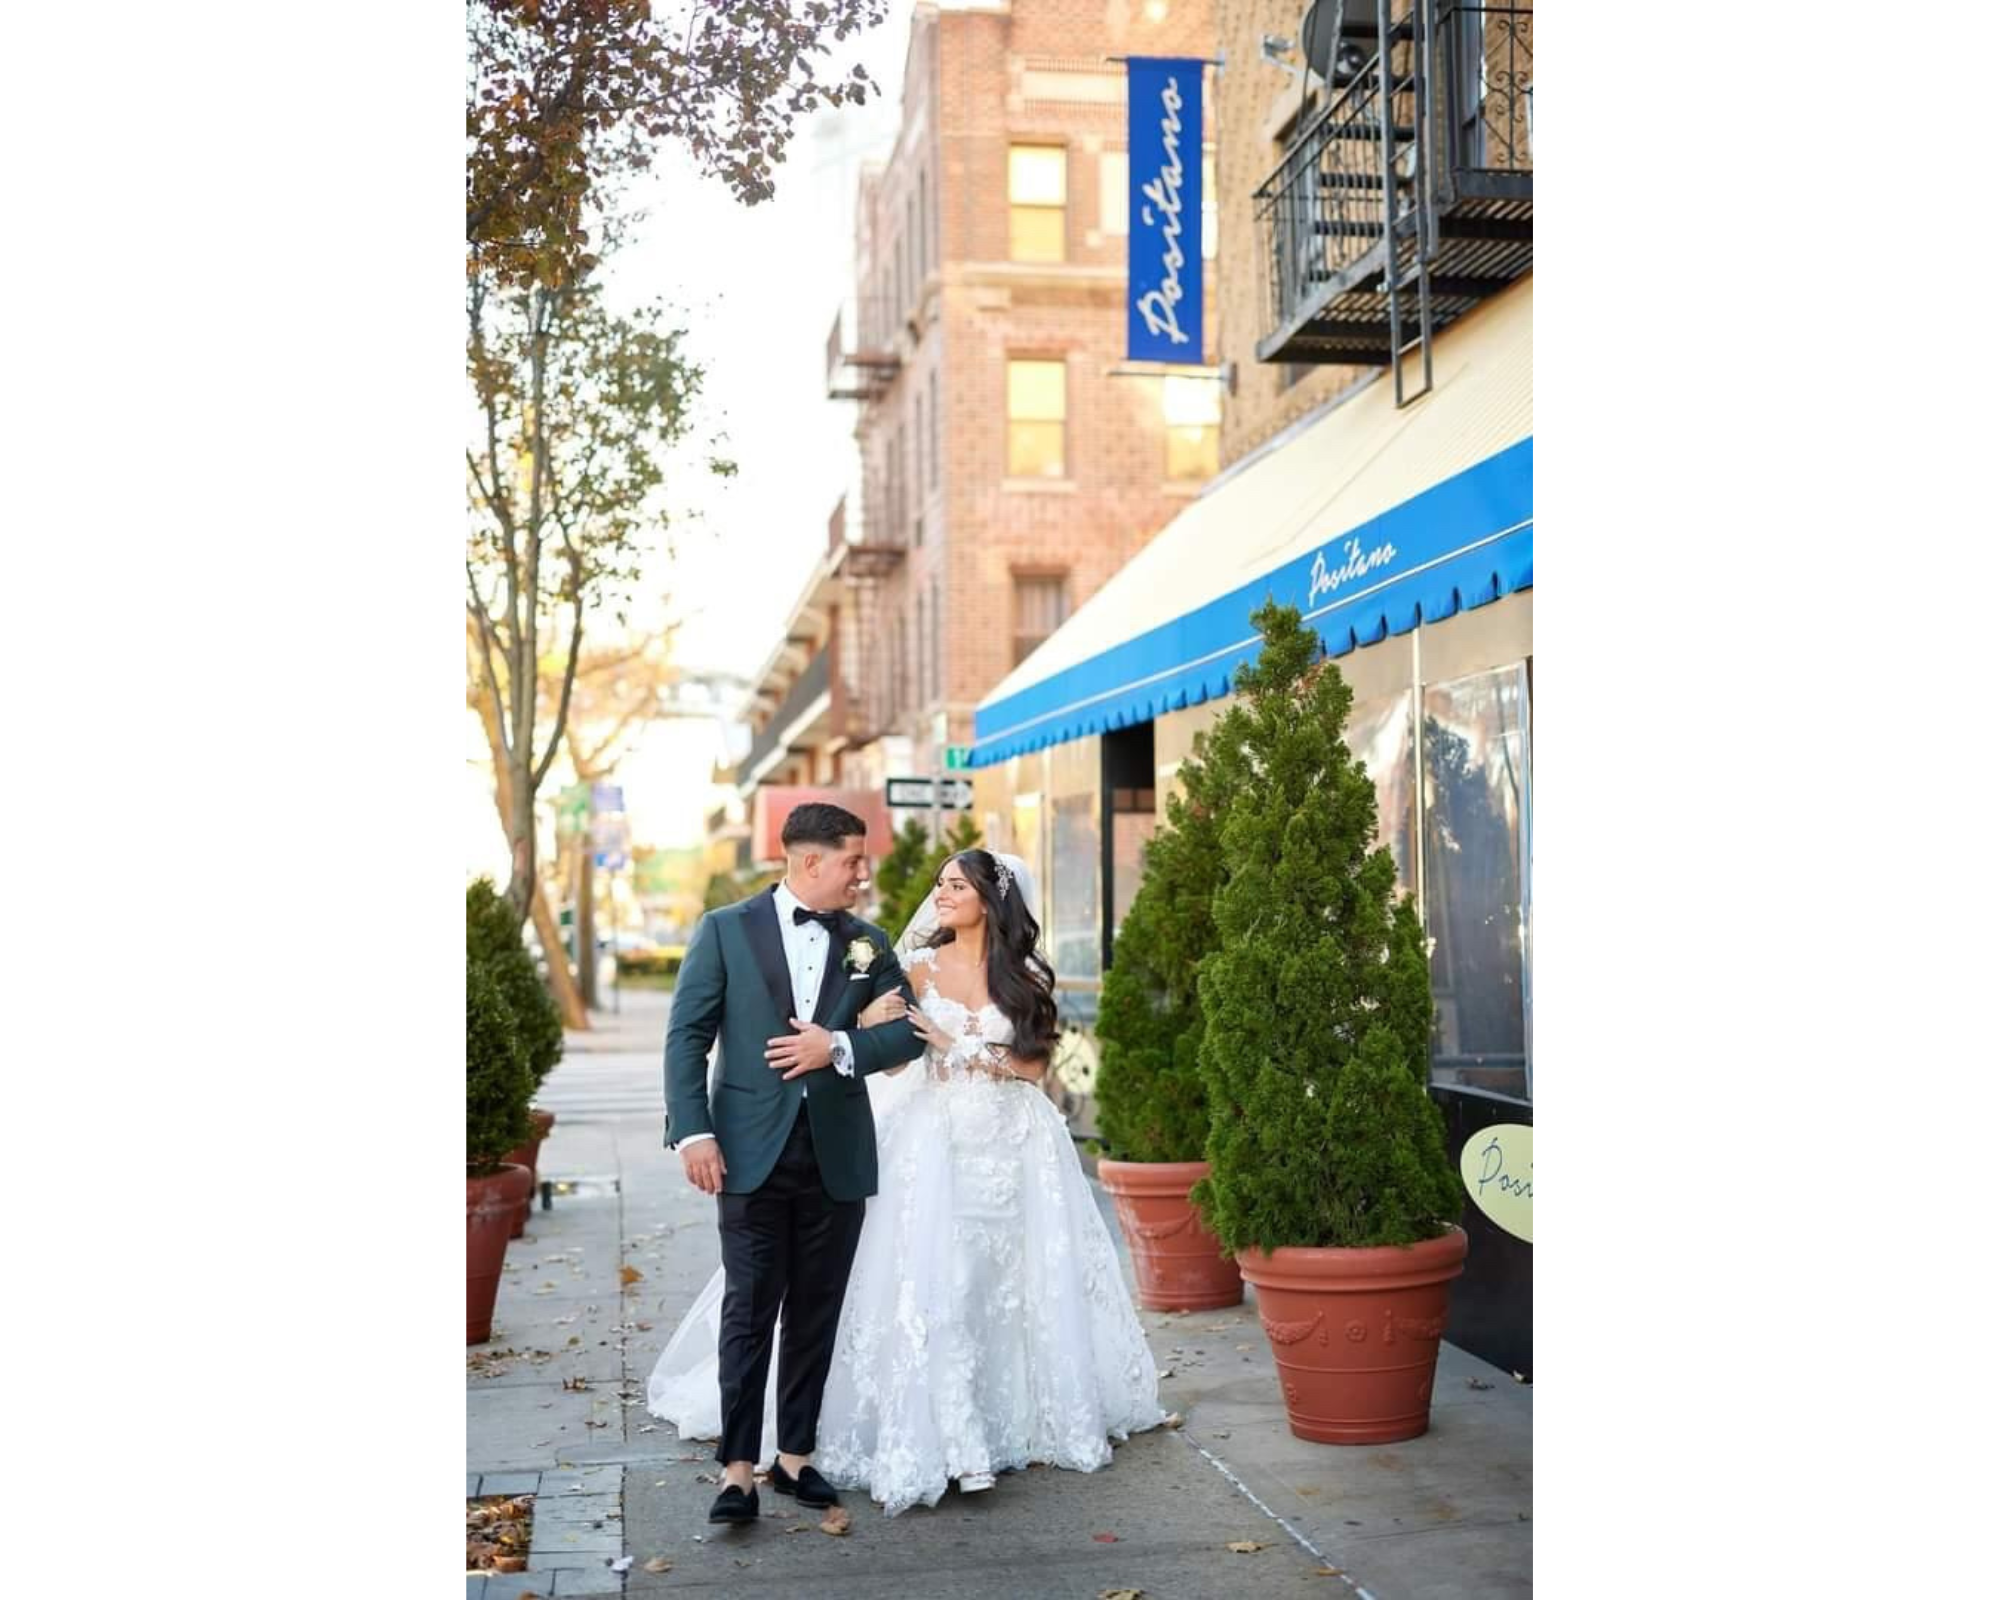 Beautiful Amanda  in her wedding gown arm in arm with handsome groom walking down a NYC street